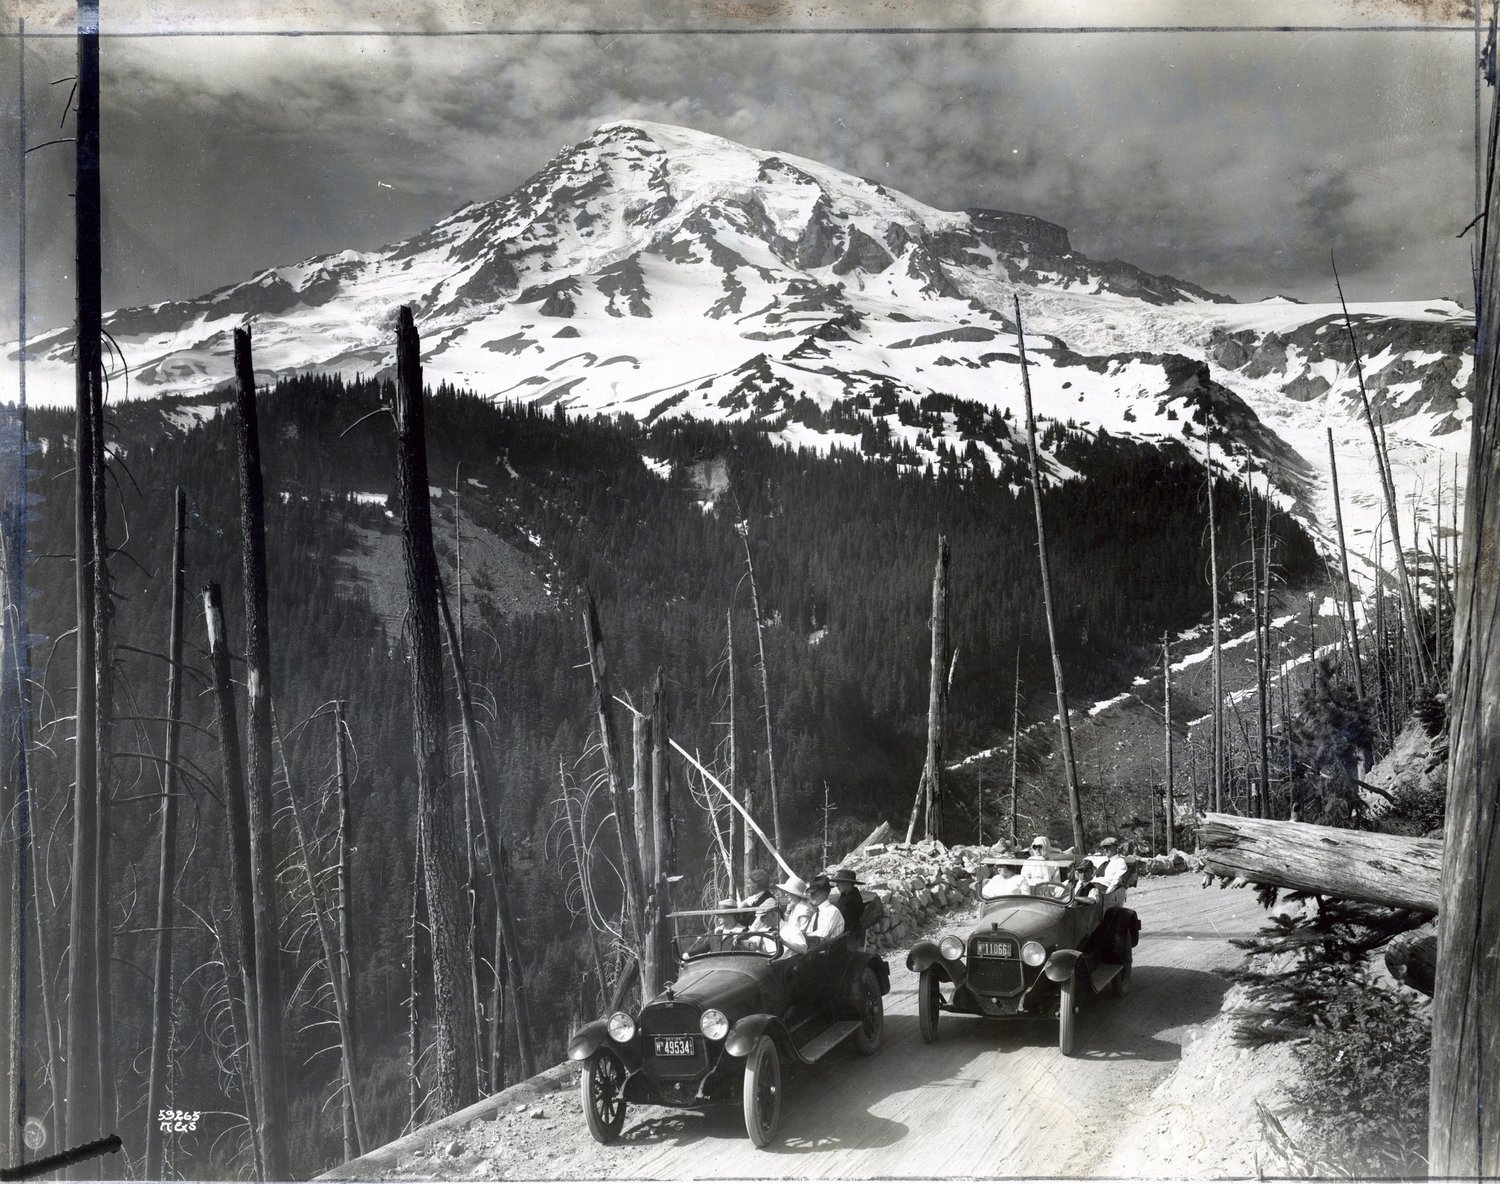 The description of this July 22, 1917, image from the Washington State Archives reads: "Many splendid views of Mount Rainier are obtained by the motorist from the 'upper' road between Nisqually Glacier and Paradise Valley, now open as far as Narada Falls. This photograph shows the Chandler Six cars mounting from 2,700 feet to 4,500 feet in high gear from Nisqually Glacier to the falls."